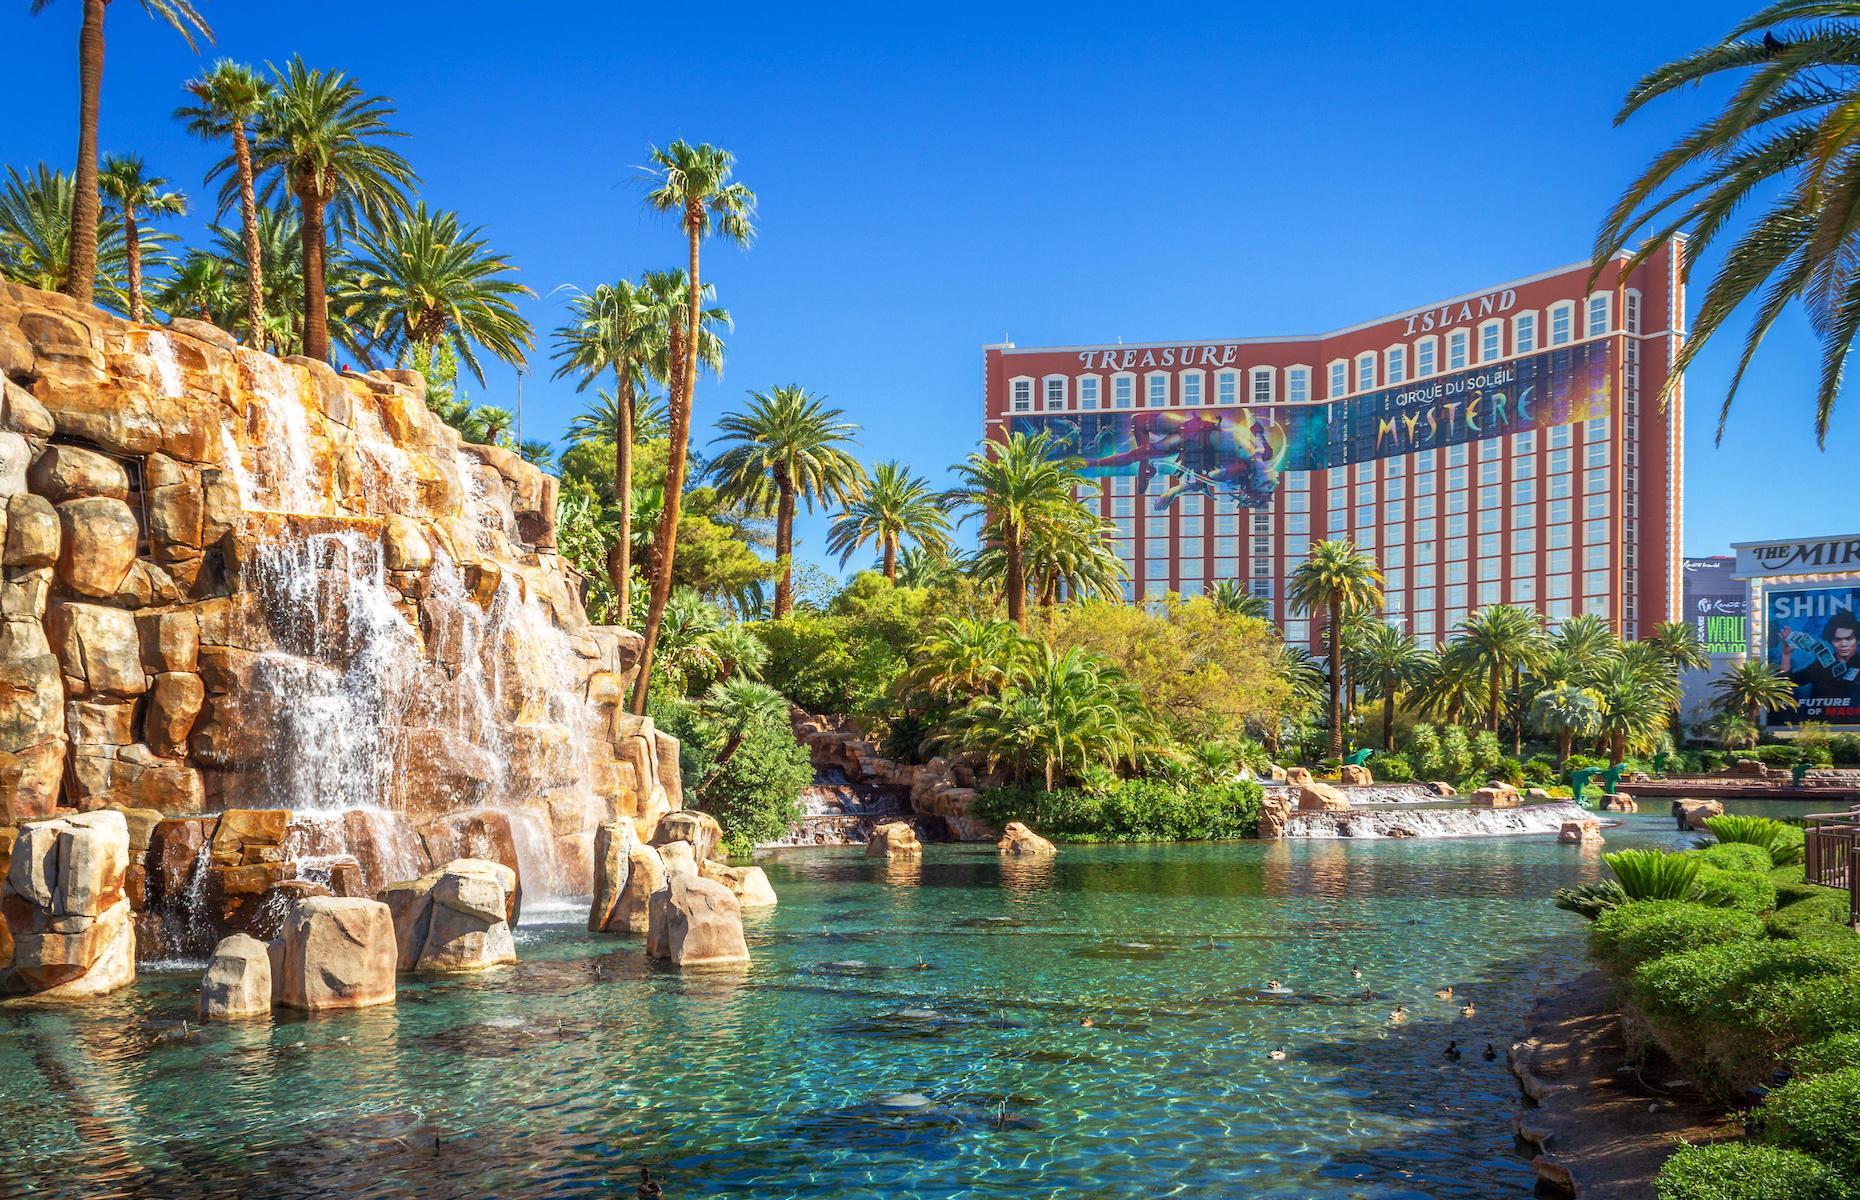 <p>It might have toned down its pirate theme, but this swashbuckling resort still has epic proportions. Featuring nearly 3,000 rooms, it opened in a central location on Las Vegas’ Strip in 1993, drawing in guests with its pirates and pyrotechnics. Its trademark Sirens of TI show was discontinued in 2013 as part of a move away from its pirate origins but its all-round tropical island vibes remain. Privately owned by Phil Ruffin, the large-scale resort was added to Radisson’s hotel portfolio in 2019.</p>